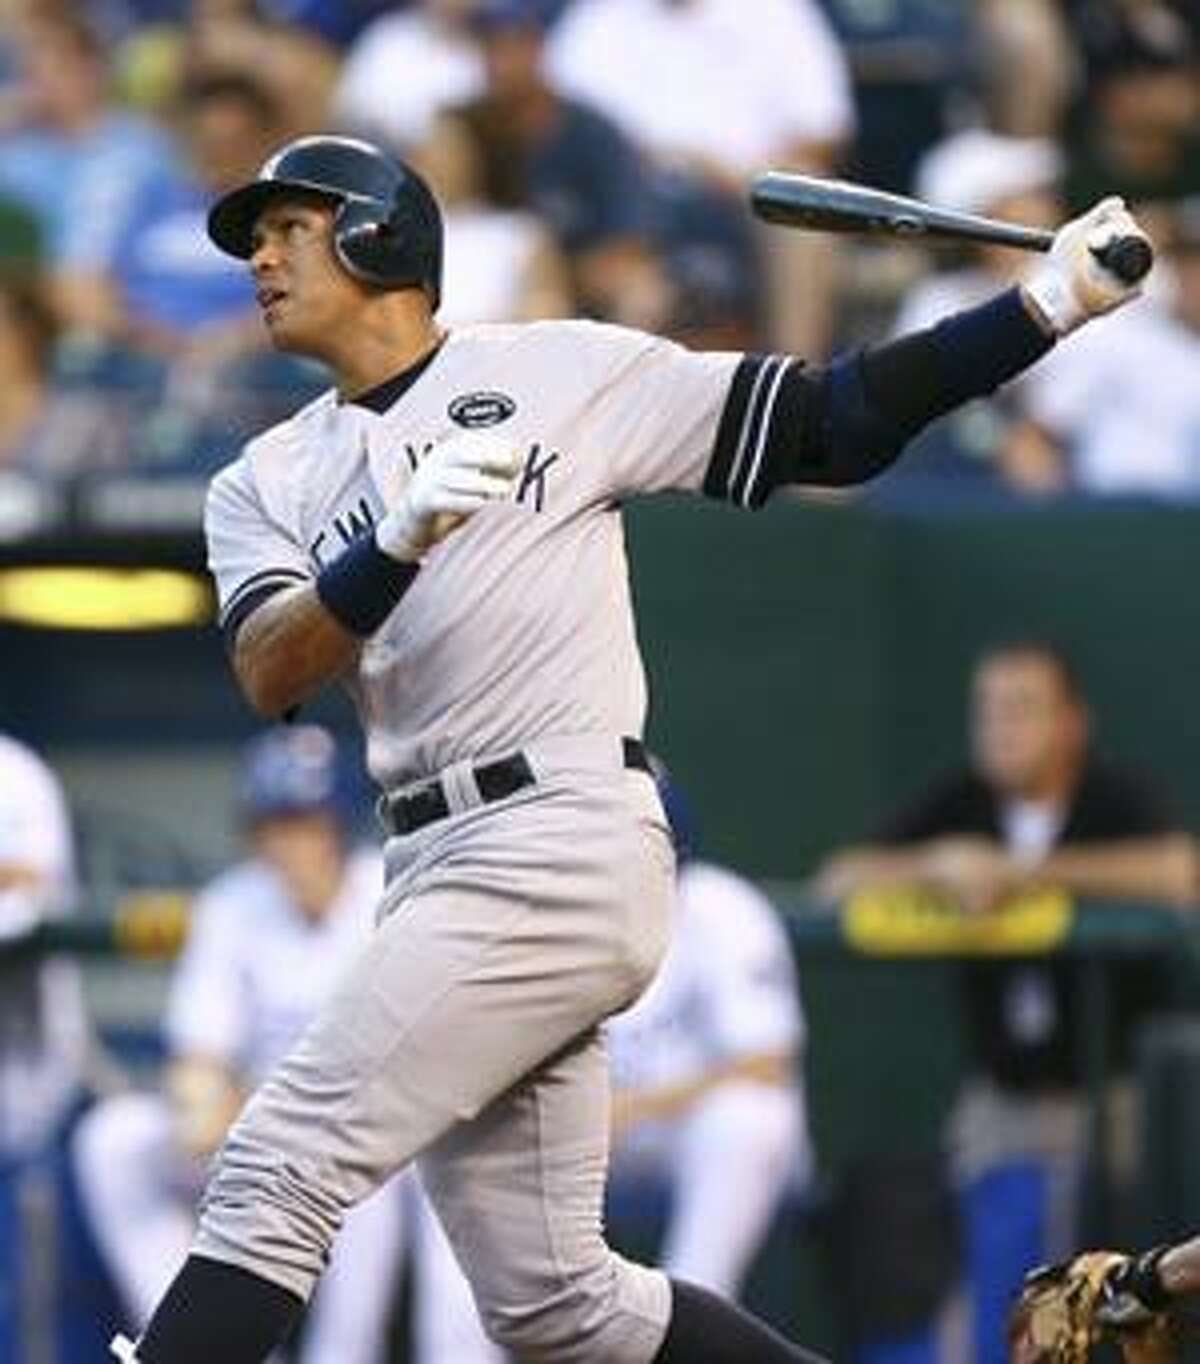 AP New York Yankees third baseman Alex Rodriguez drives the ball over the center field wall for a home run during the sixth inning of Saturday's game against the Kansas City Royals in Kansas City.